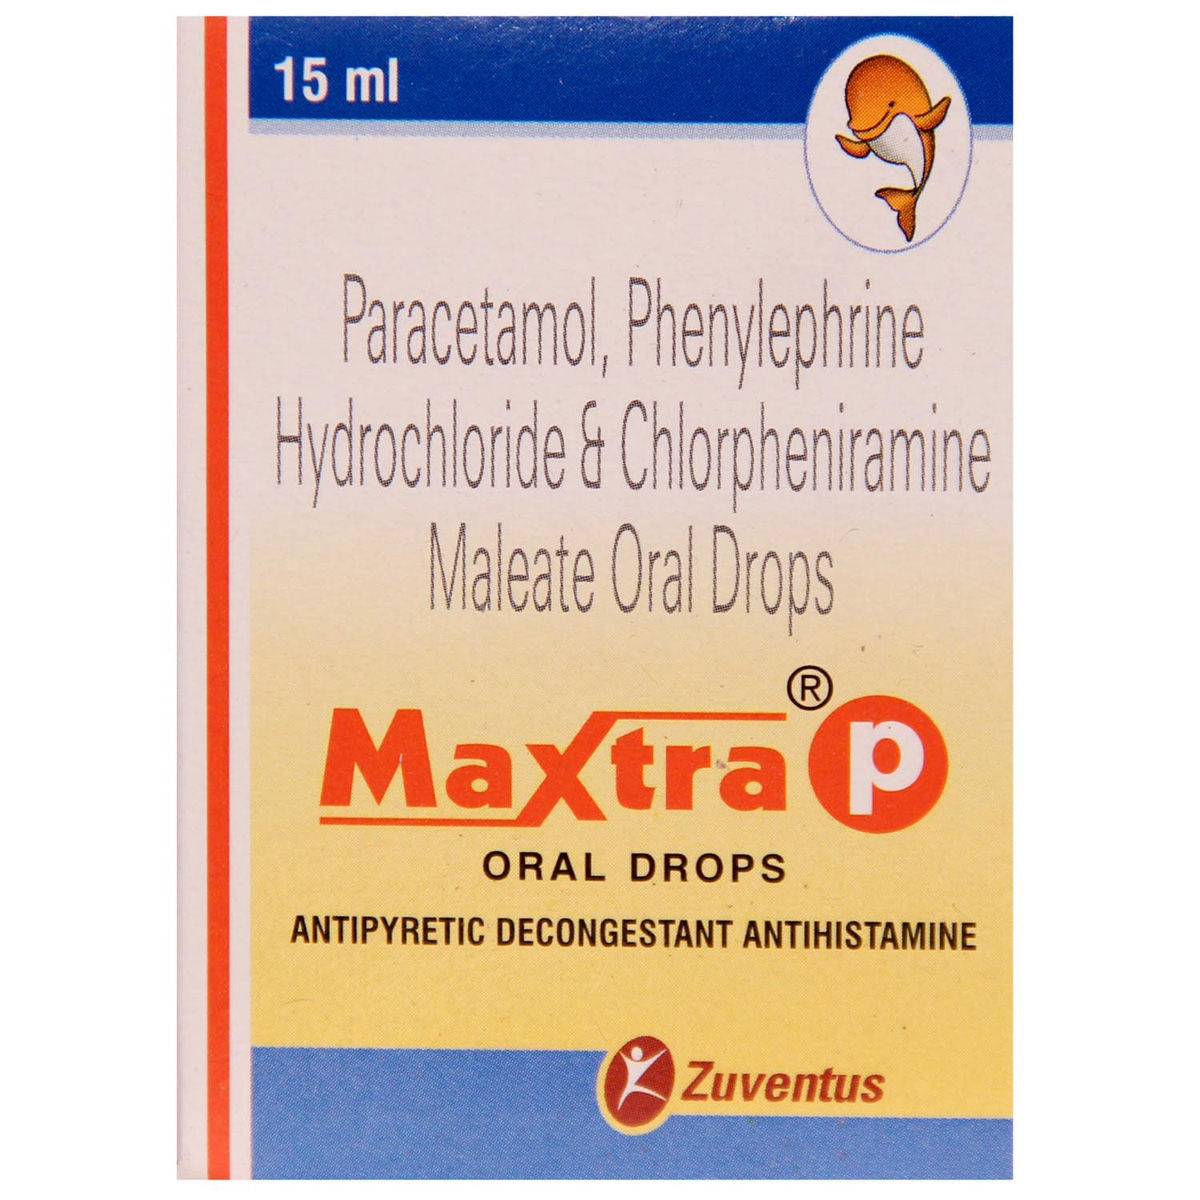 Maxtra P Oral Drops 15 ml, Pack of 1 ORAL DROPS